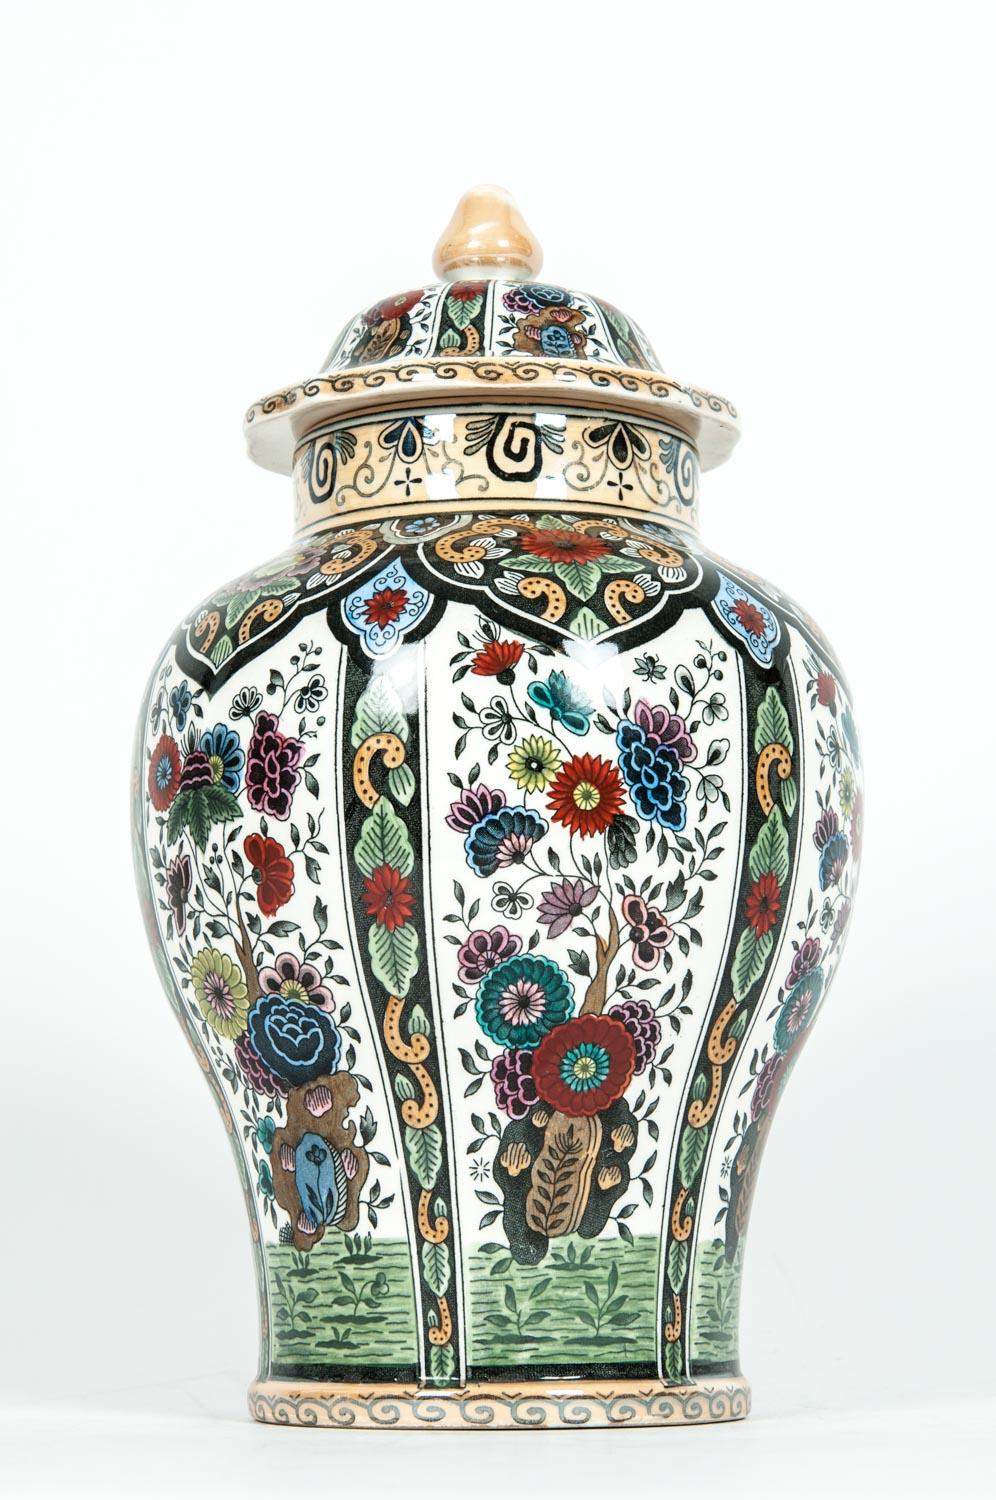 Dutch porcelain vintage decorative covered urn. The covered urn is in excellent condition, maker's mark undersigned. The piece measure about 11.5 inches high x 8 inches diameter.